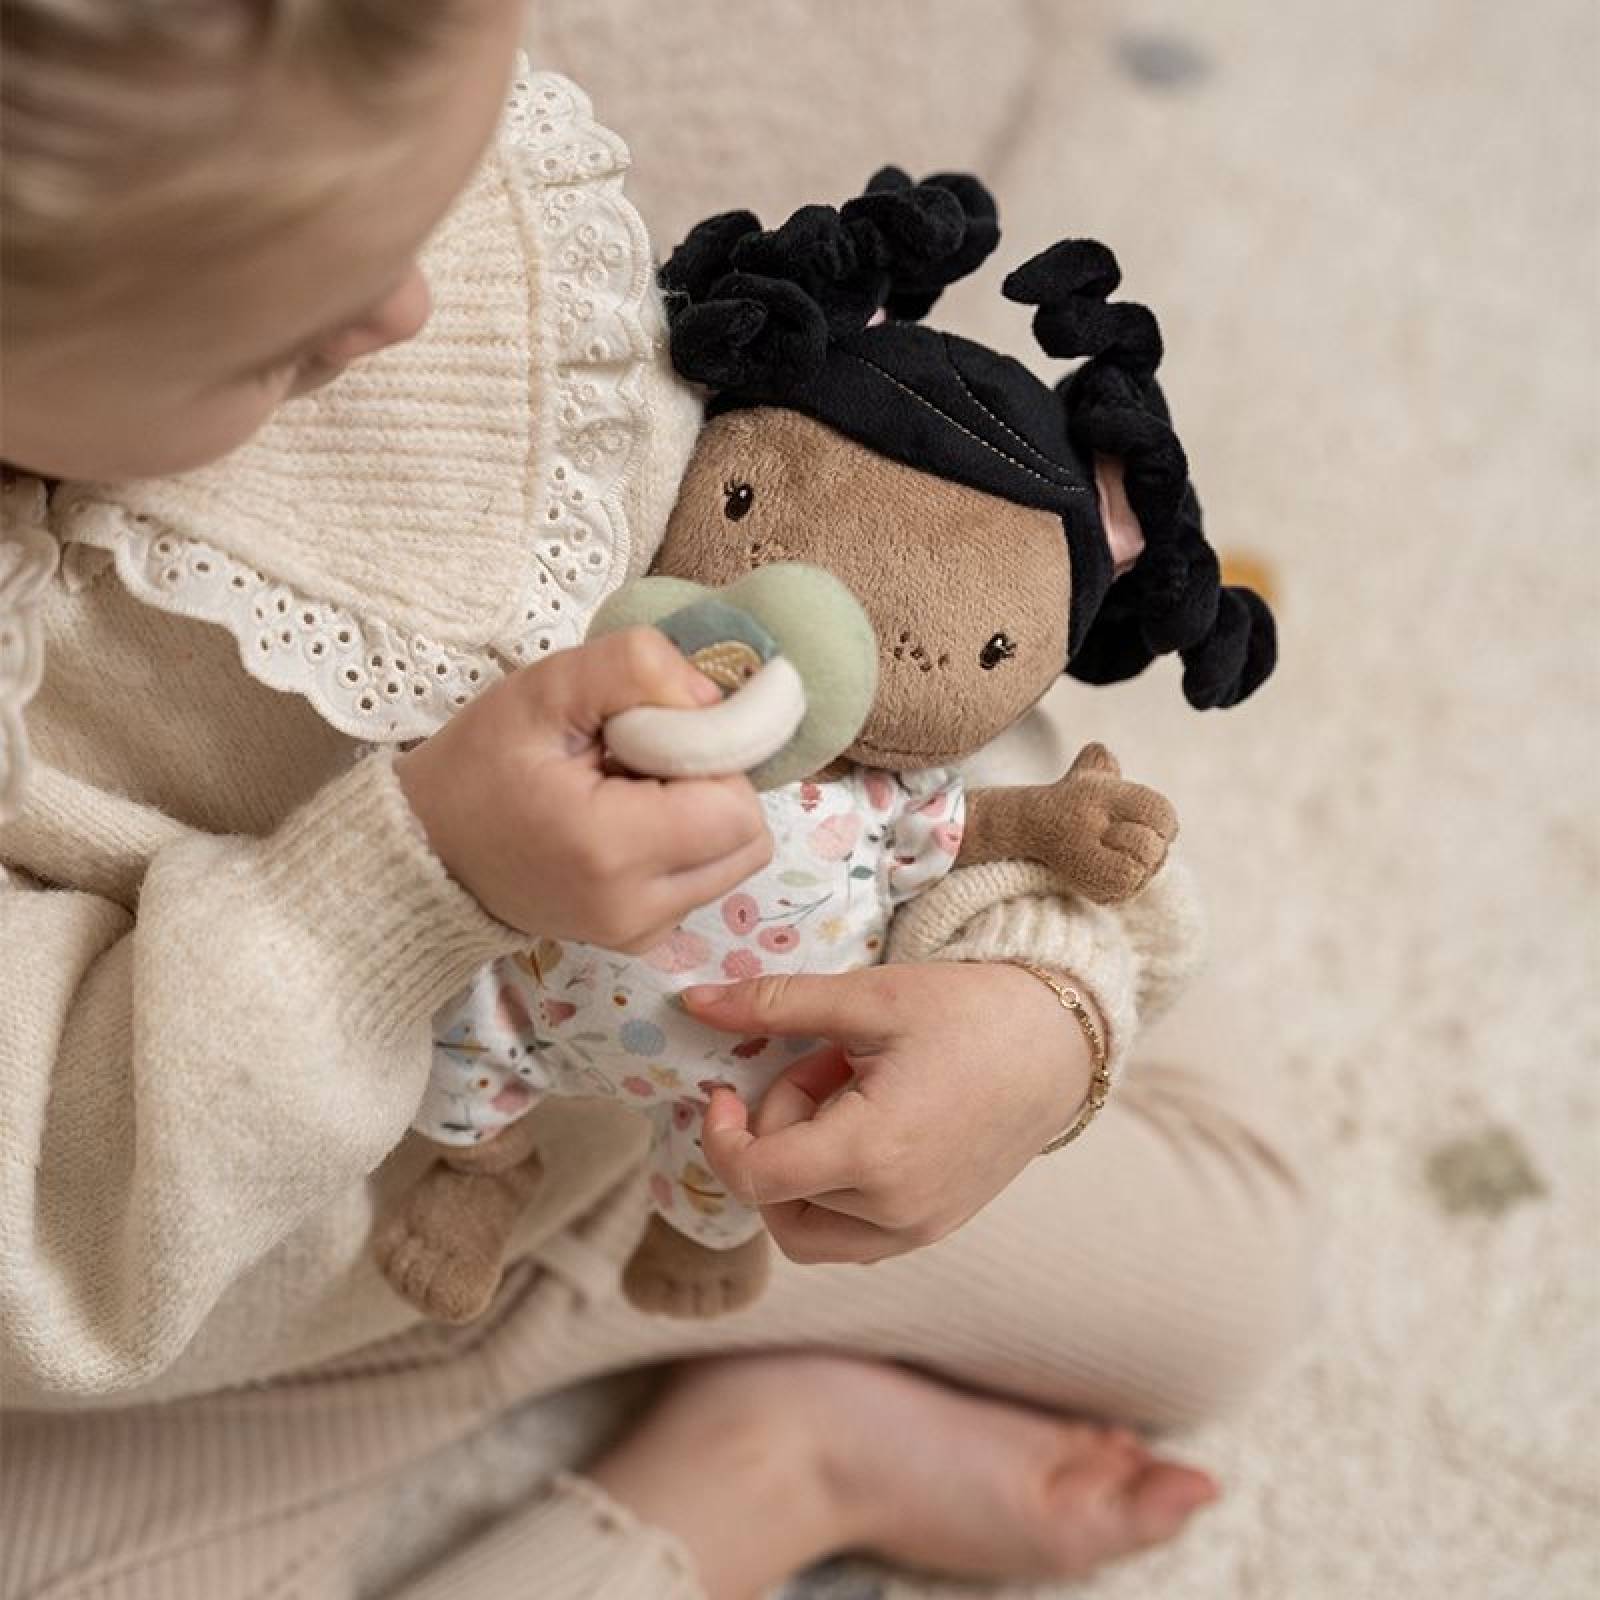 Evi Baby Doll Toy & Accessories By Little Dutch 0+ thumbnails